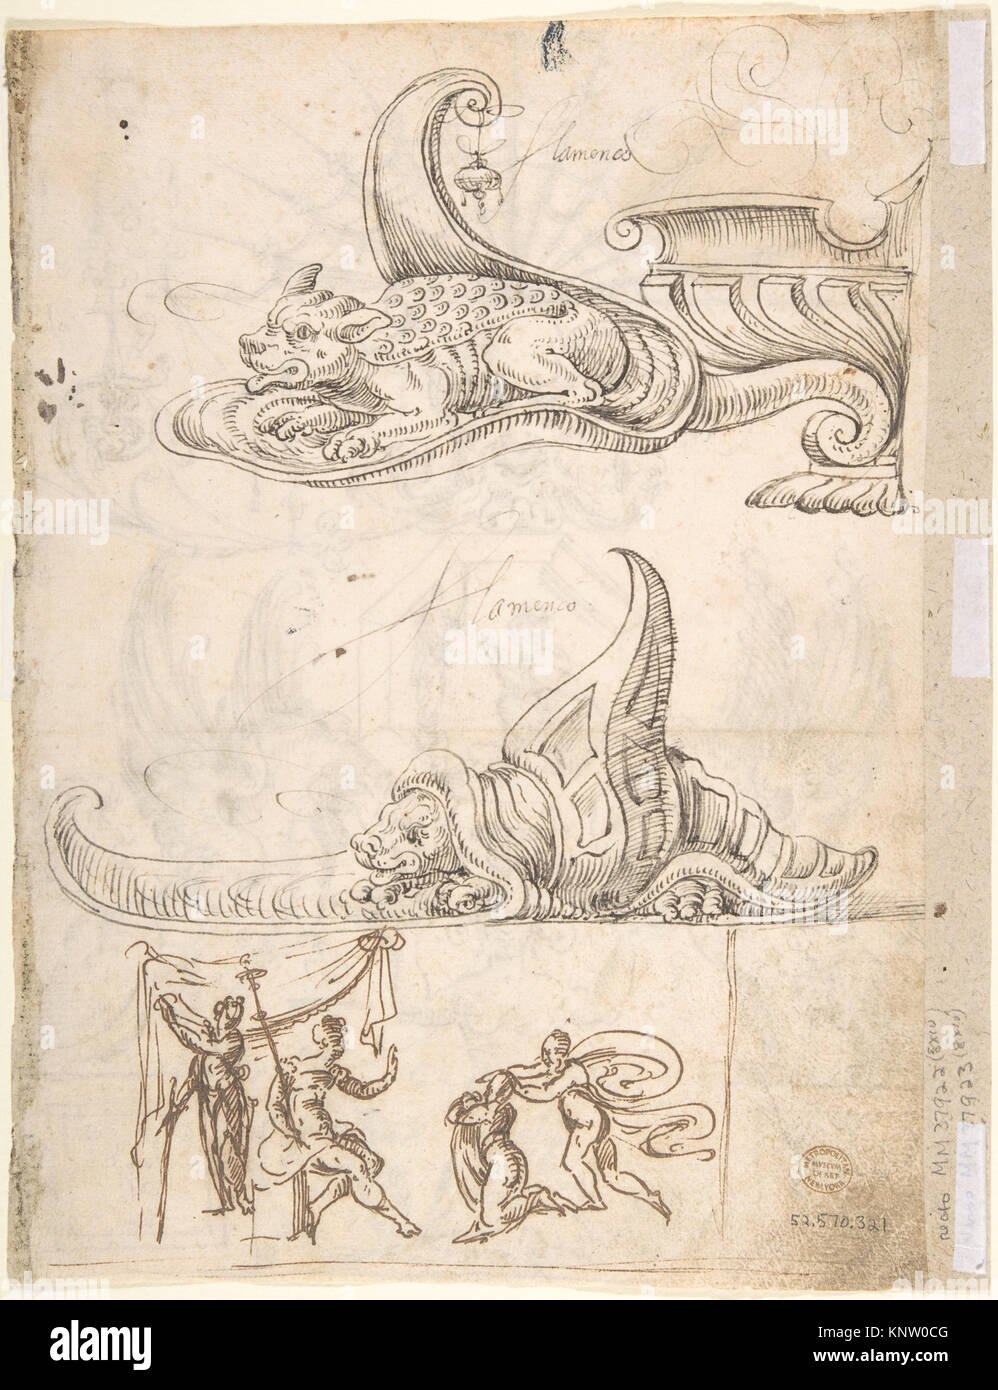 Grotesque Design with an Octagonal Panel in the Center and Two Griffins Drinking from PLates held up by a Hybrid Creature (recto); Two Turtles above a Scene with Four Figures (verso) MET DP800325 337501 Stock Photo